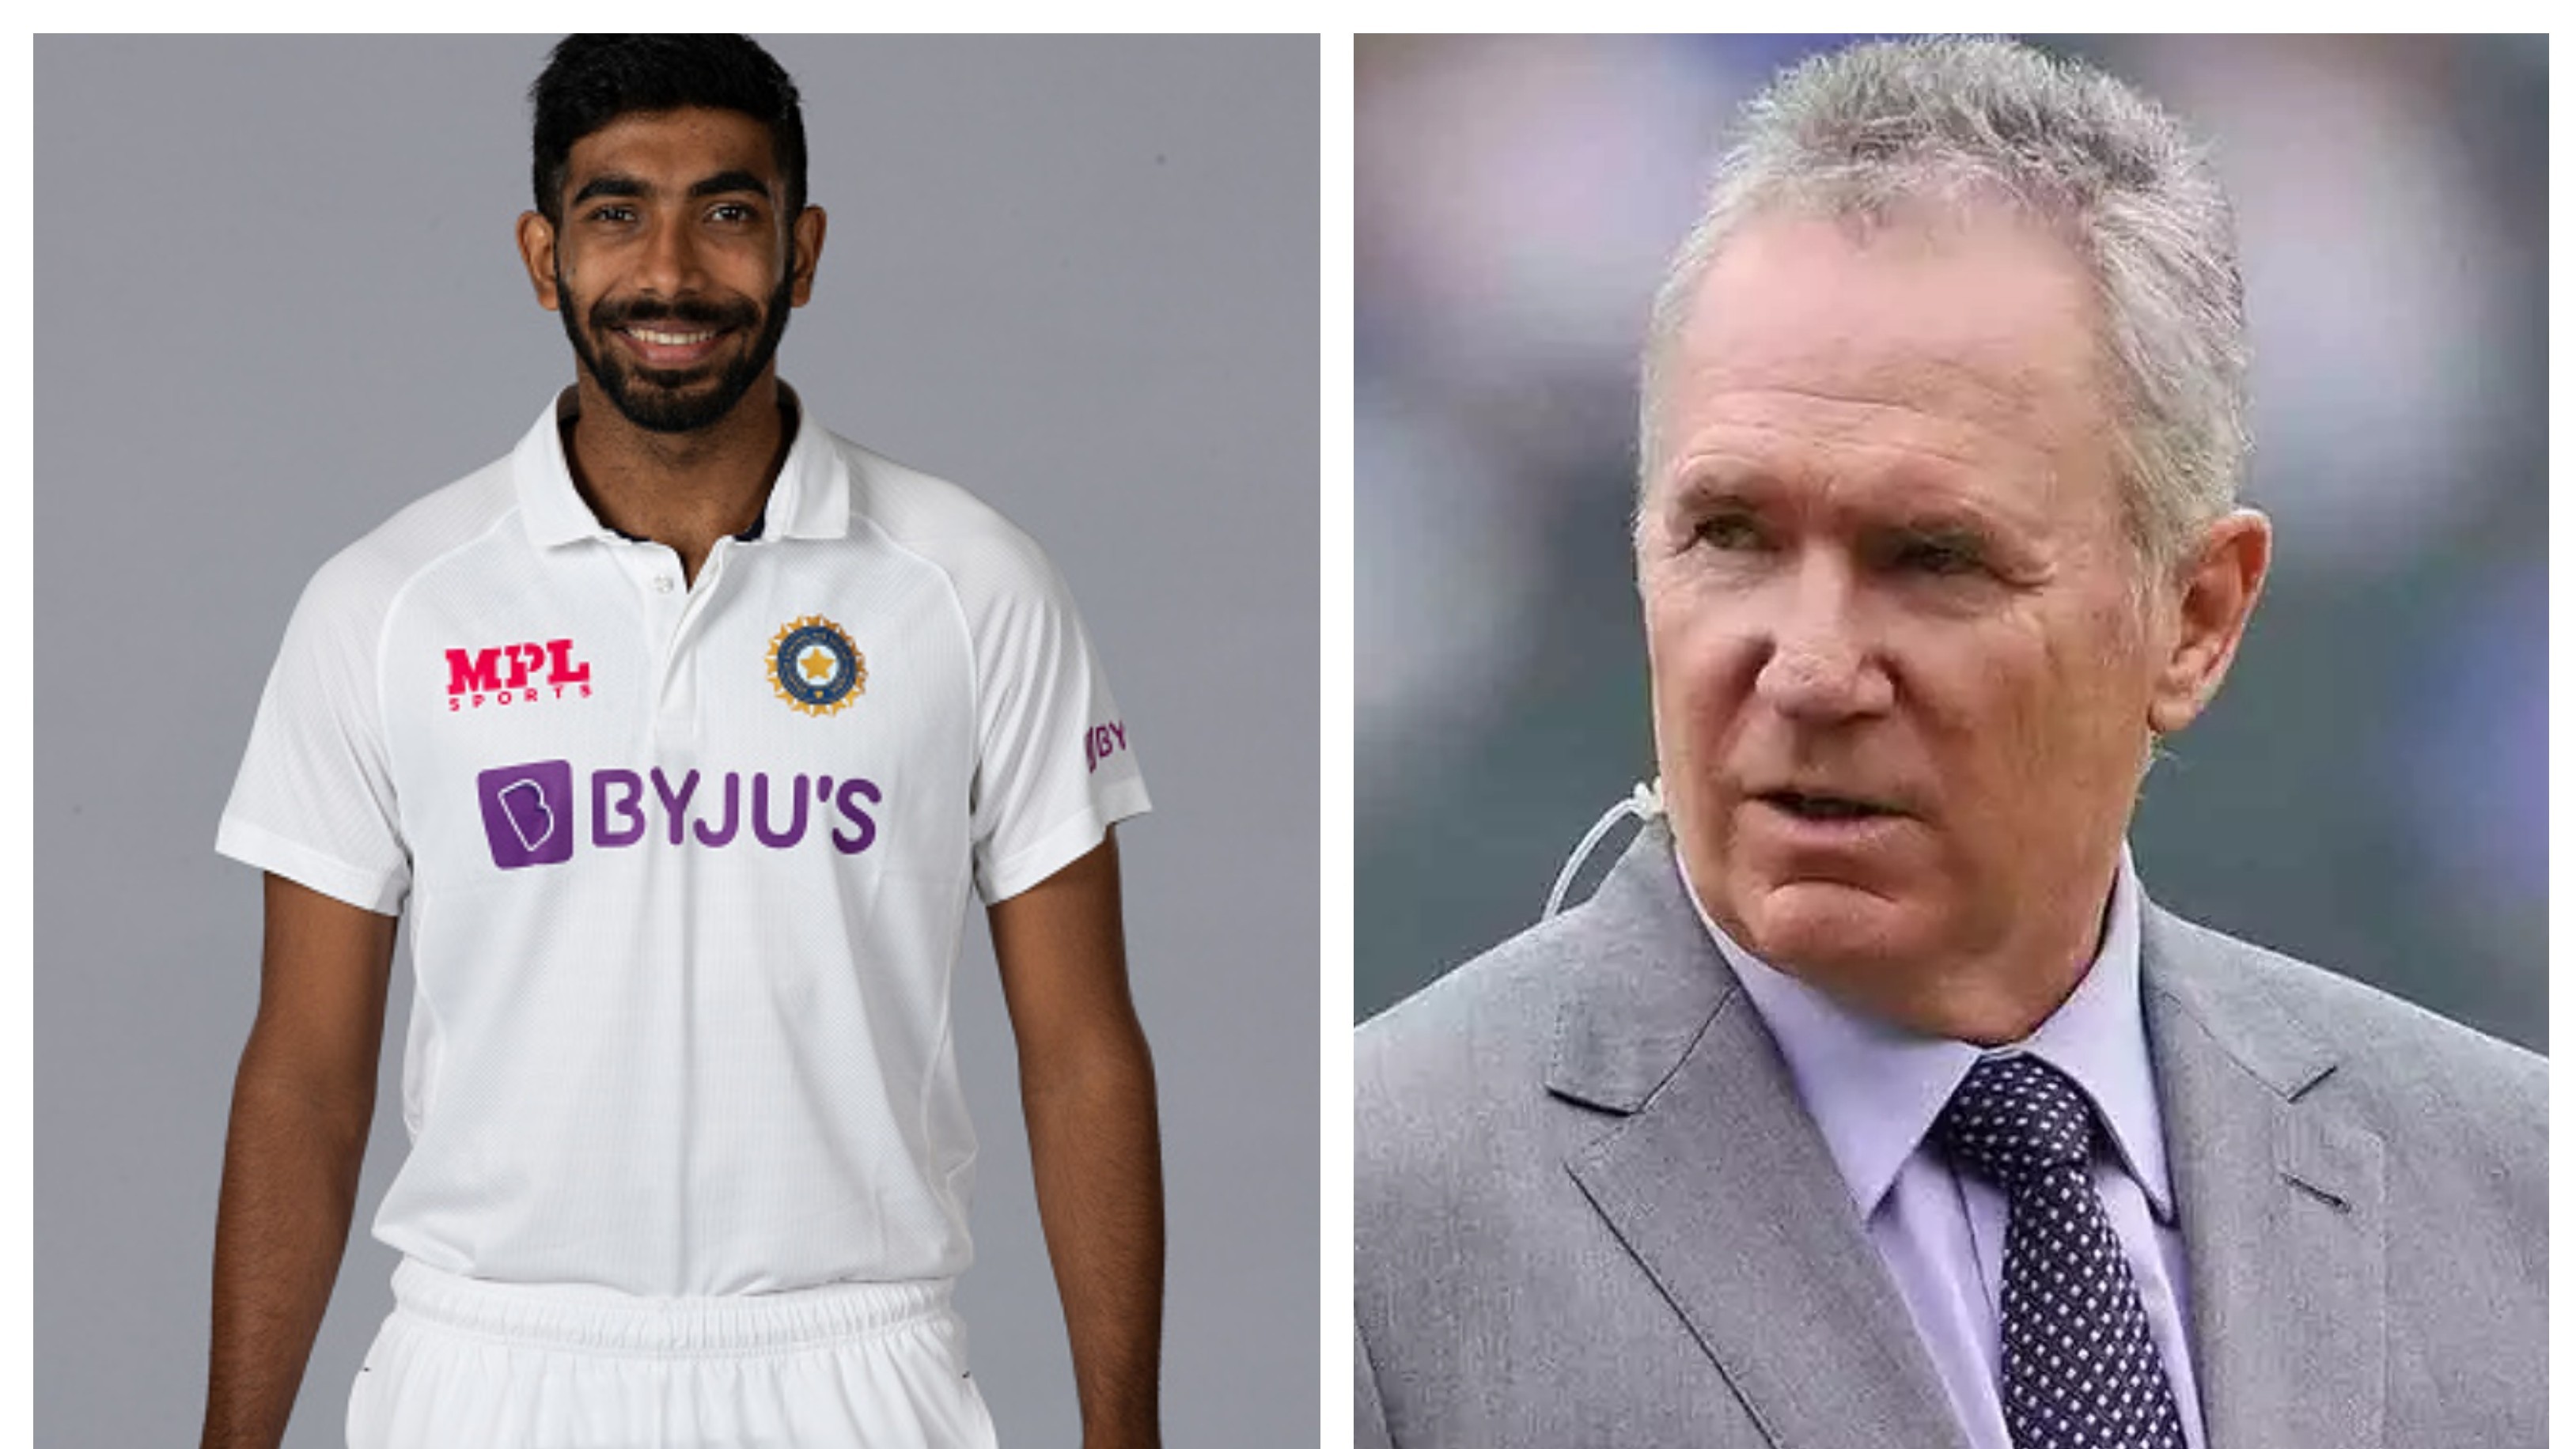 AUS v IND 2020-21: ‘Jasprit Bumrah could be the real difference’, says Allan Border ahead of Test series